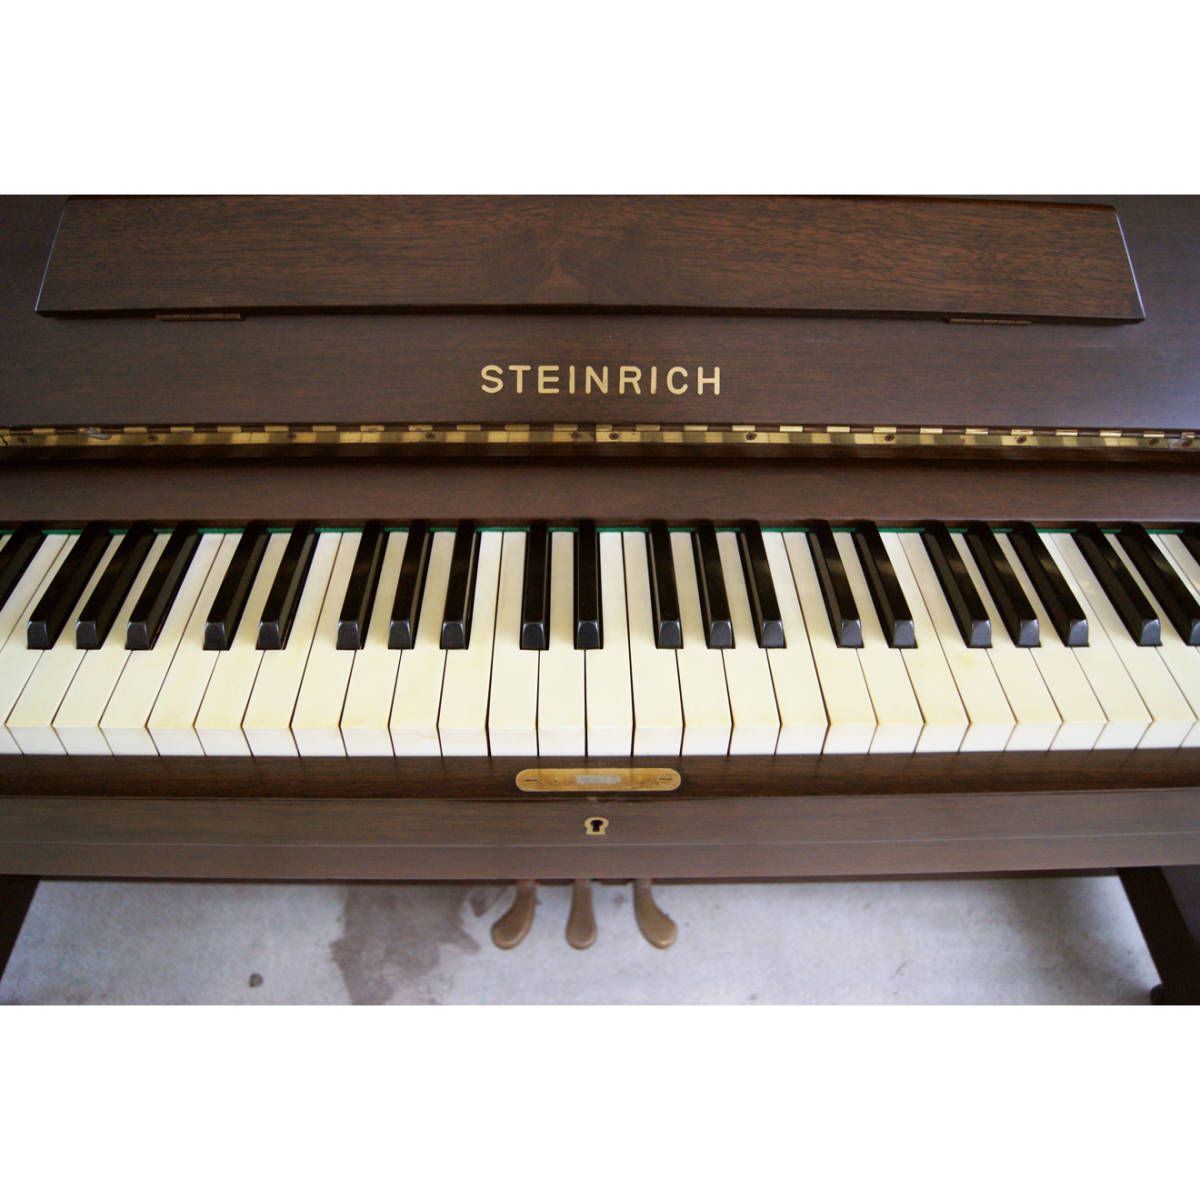 5174h37[STEINRICH baby's bib nlihi upright piano S-20 * style law ending ]3 pedal dark brown color adult . gloss . finishing key * chair attaching *